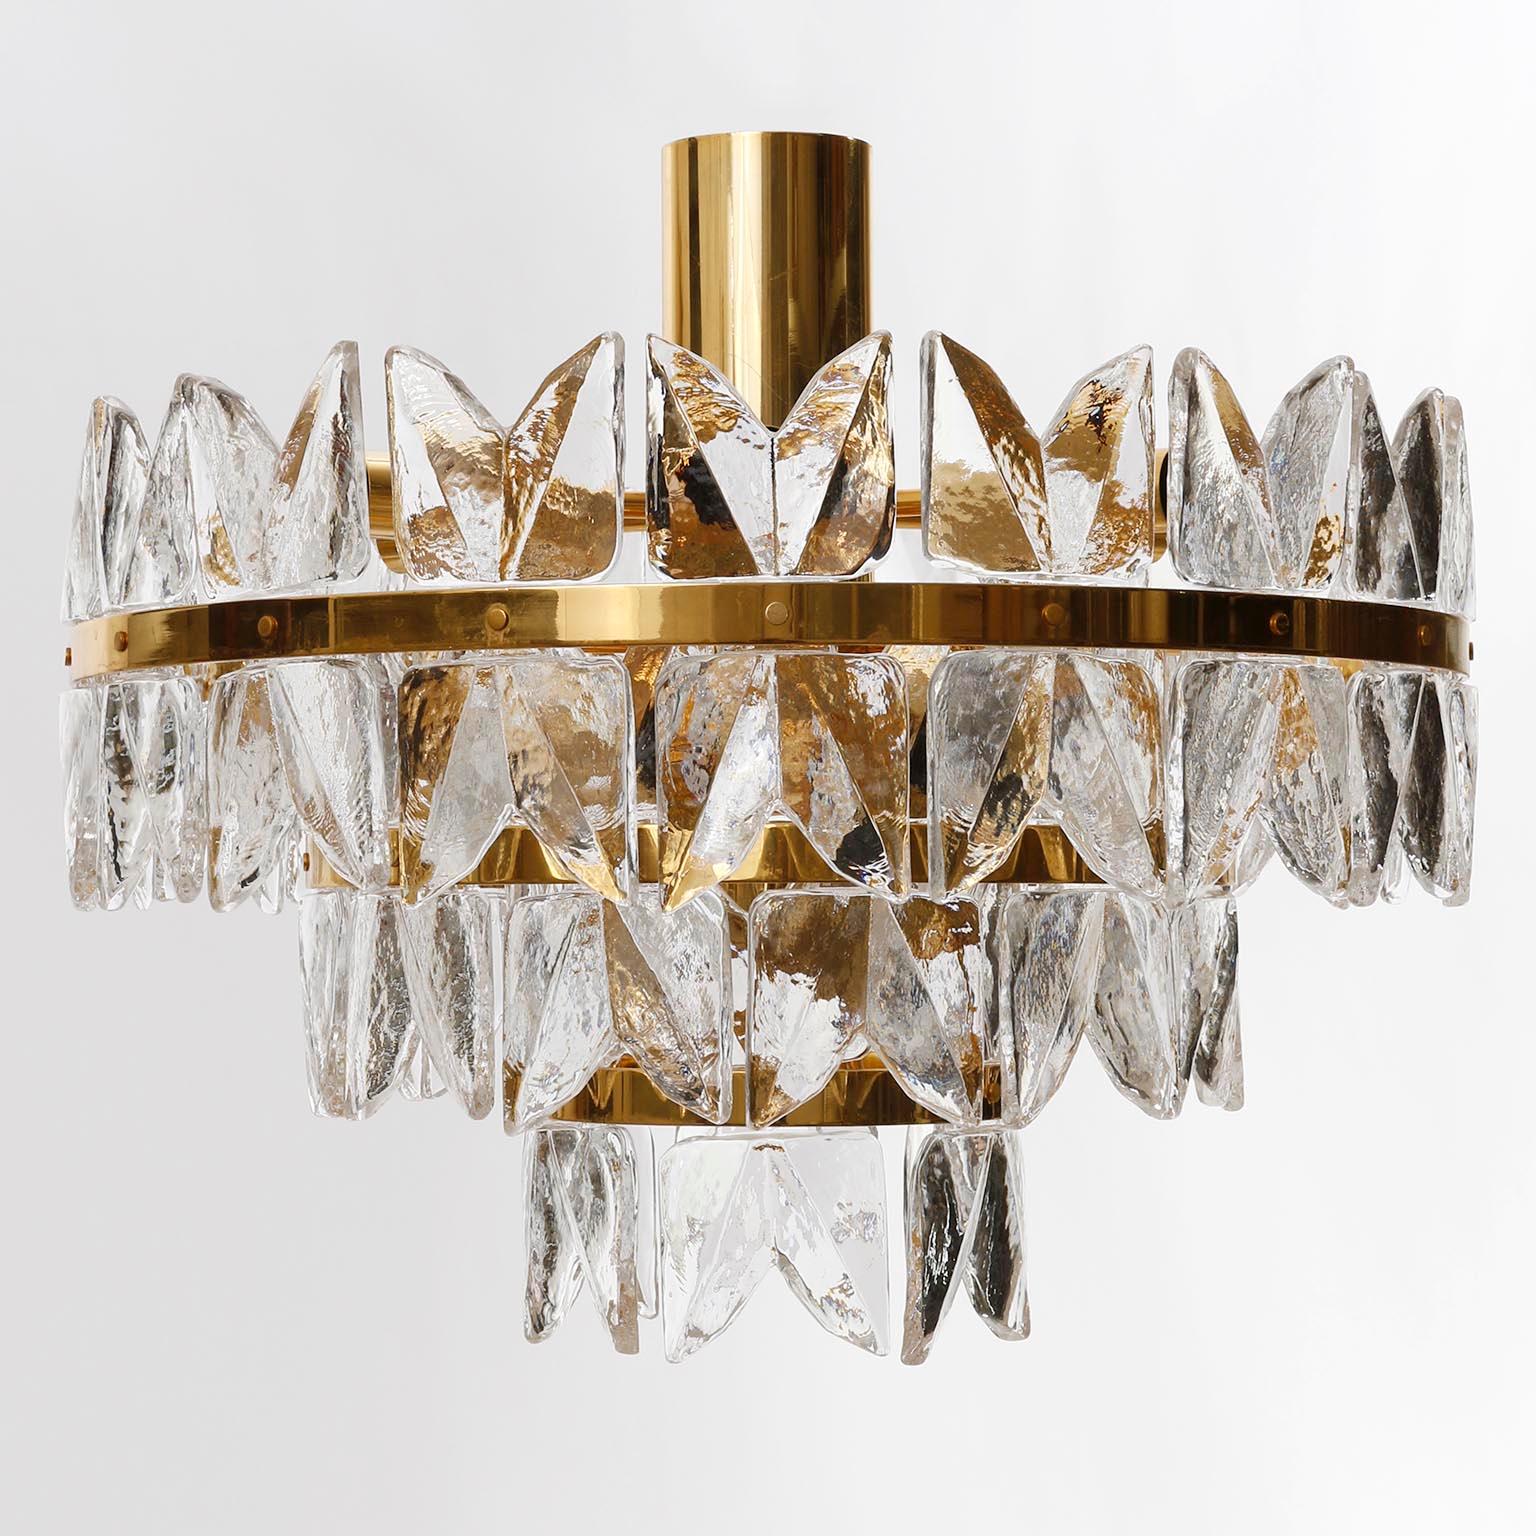 A rare and very exclusive Hollywood regency Mid-Century Modern flush mount light fixture model 'Corina' by J.T. Kalmar, Vienna, Austria, manufactured in midcentury, circa 1970 (late 1960s or early 1970s).
A high quality item which is made of a